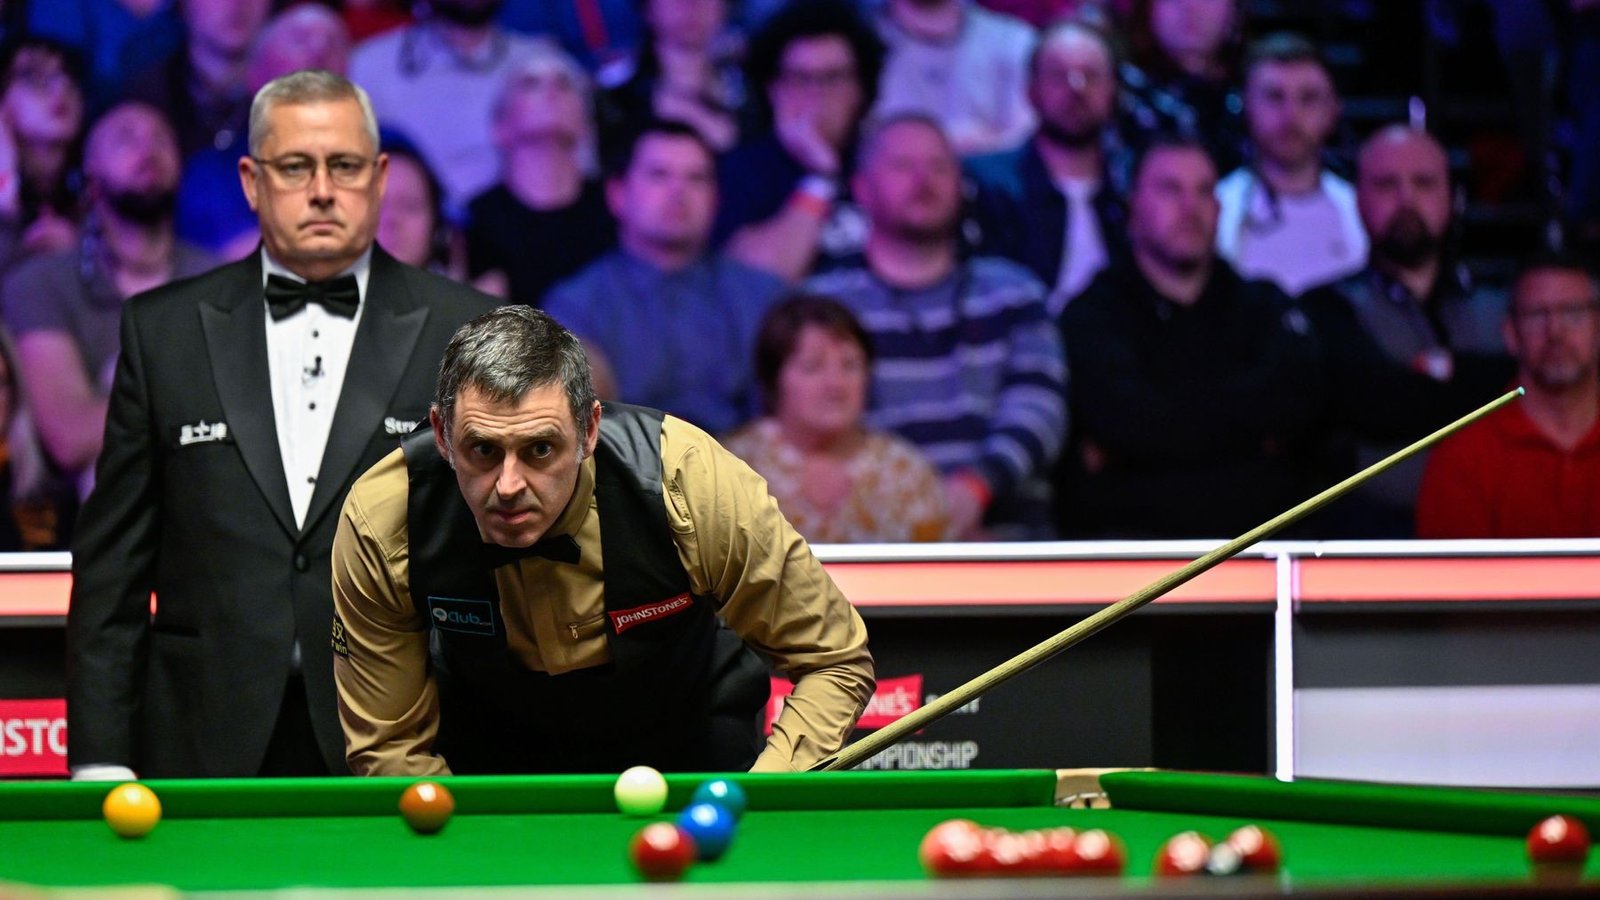 Ronnie O’Sullivan advances to his third Tour Championship final with a 10-7 victory over Gary Wilson in Manchester.